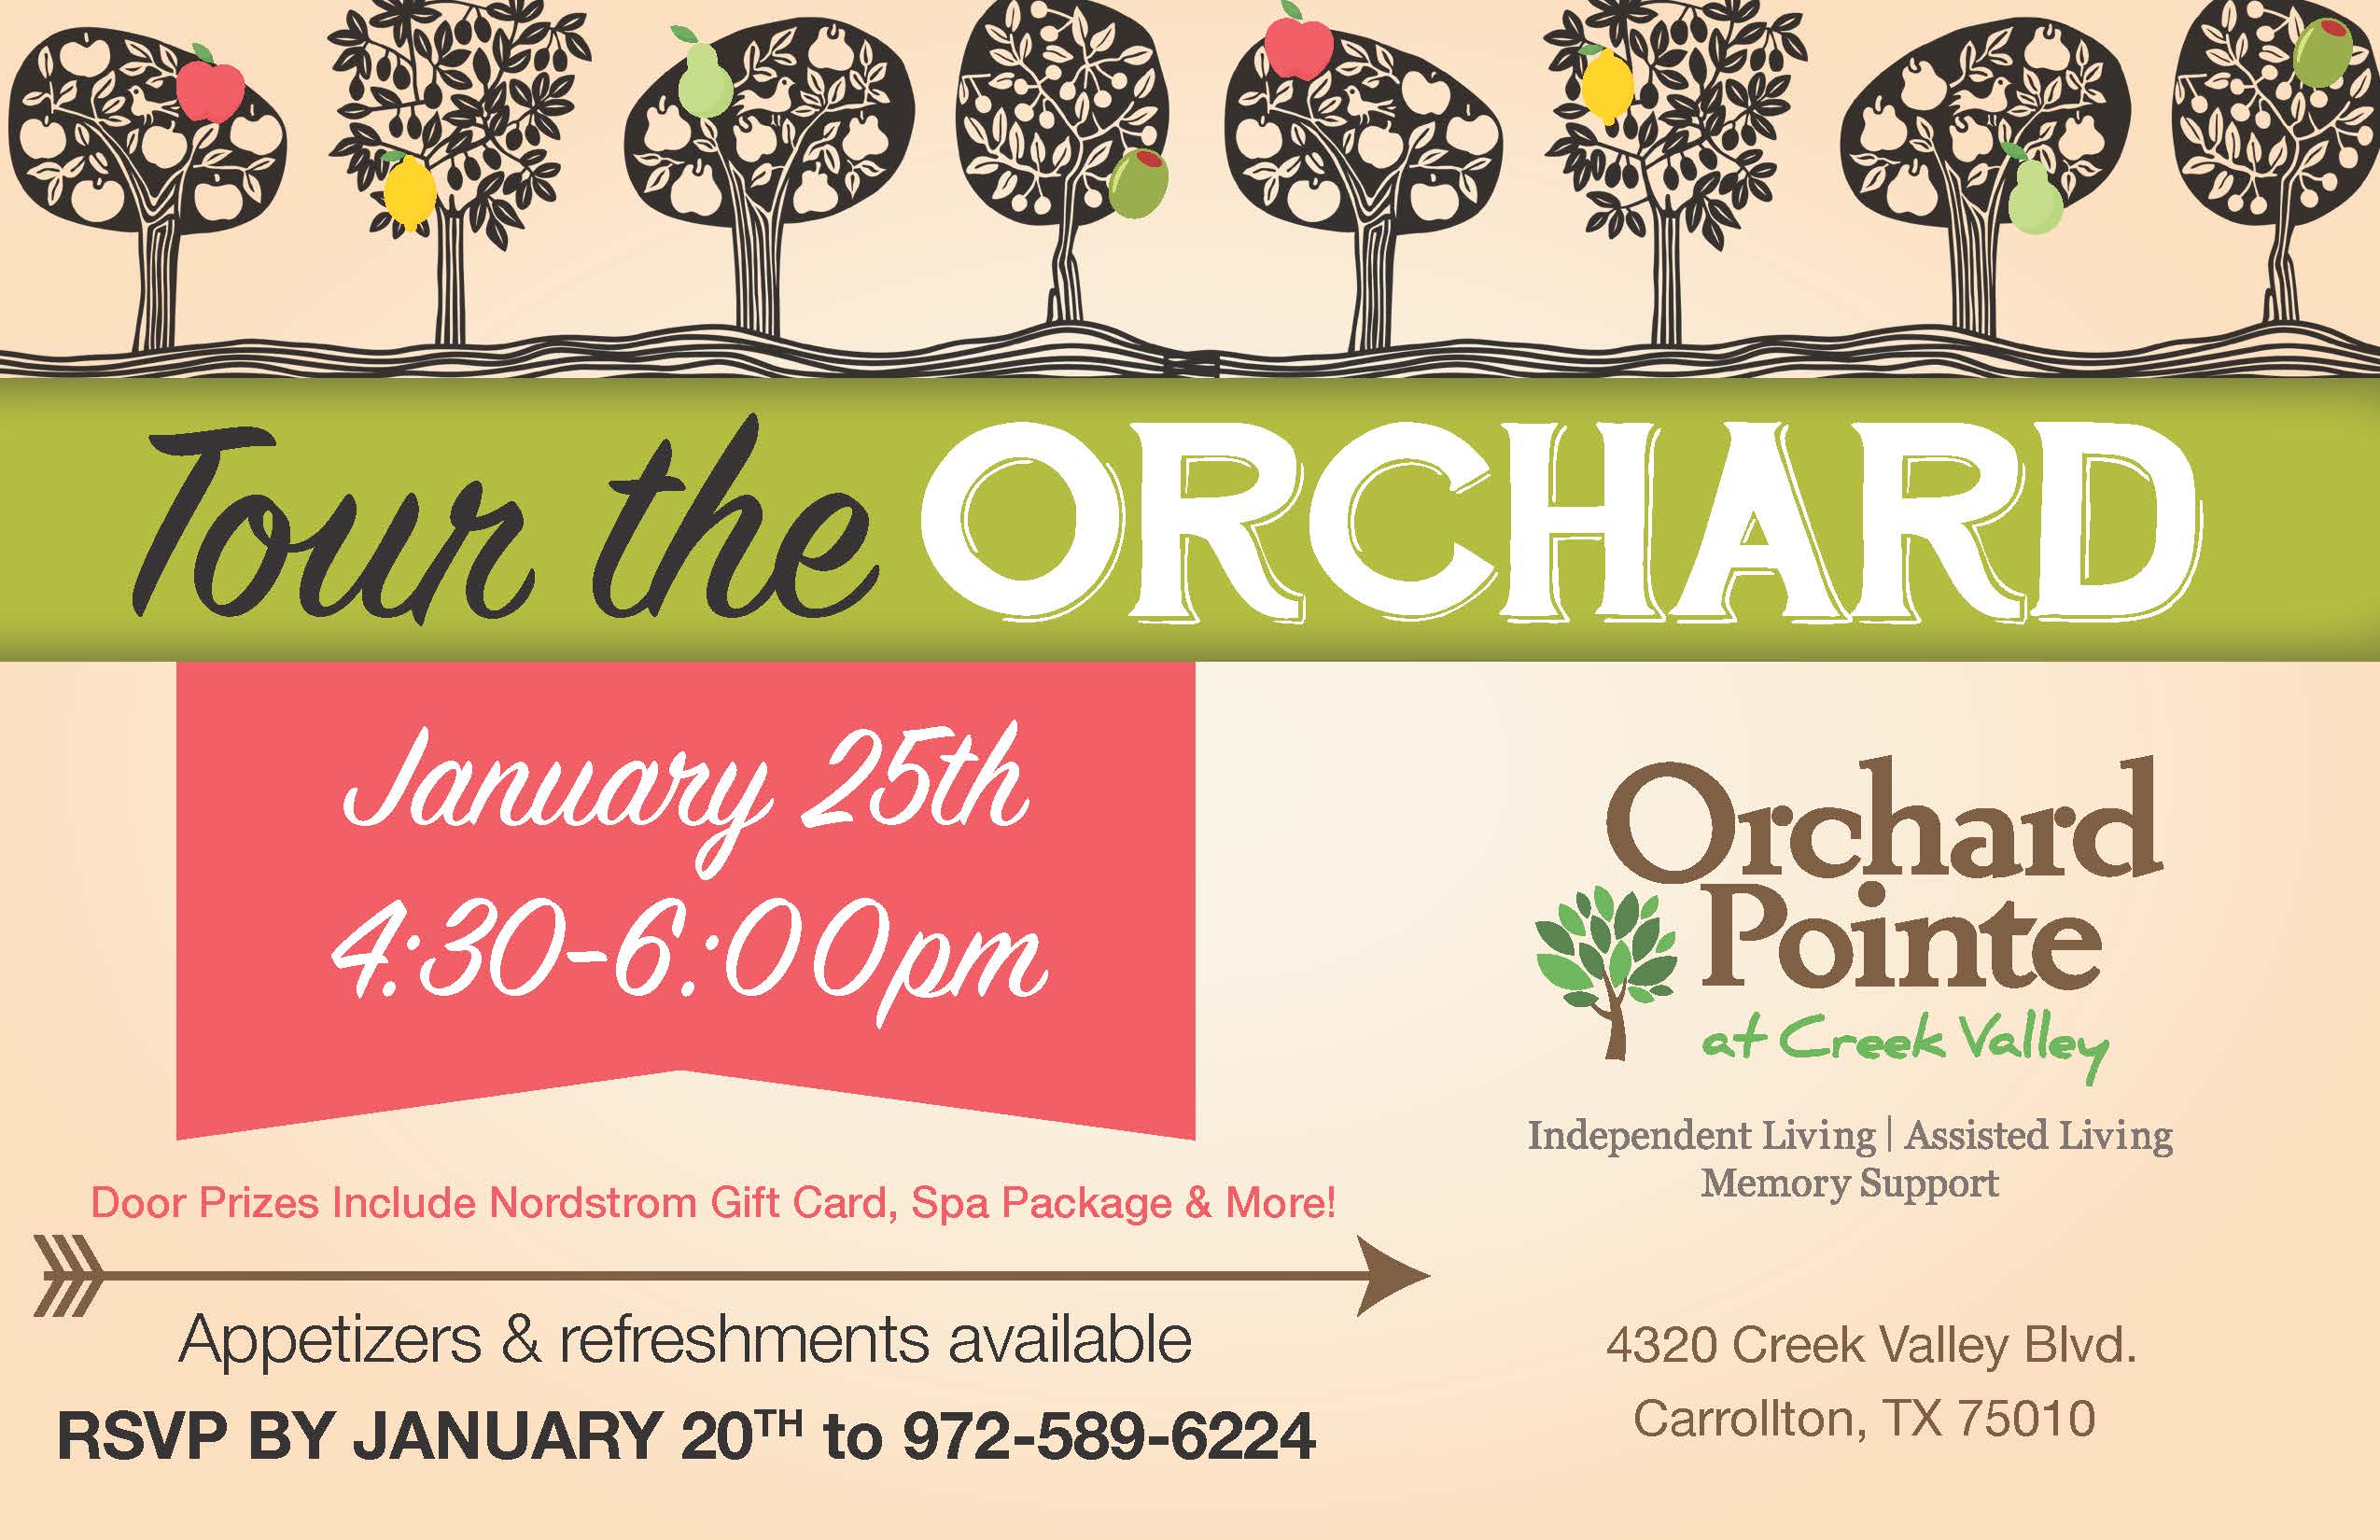 Invitation to Tour the Orchard